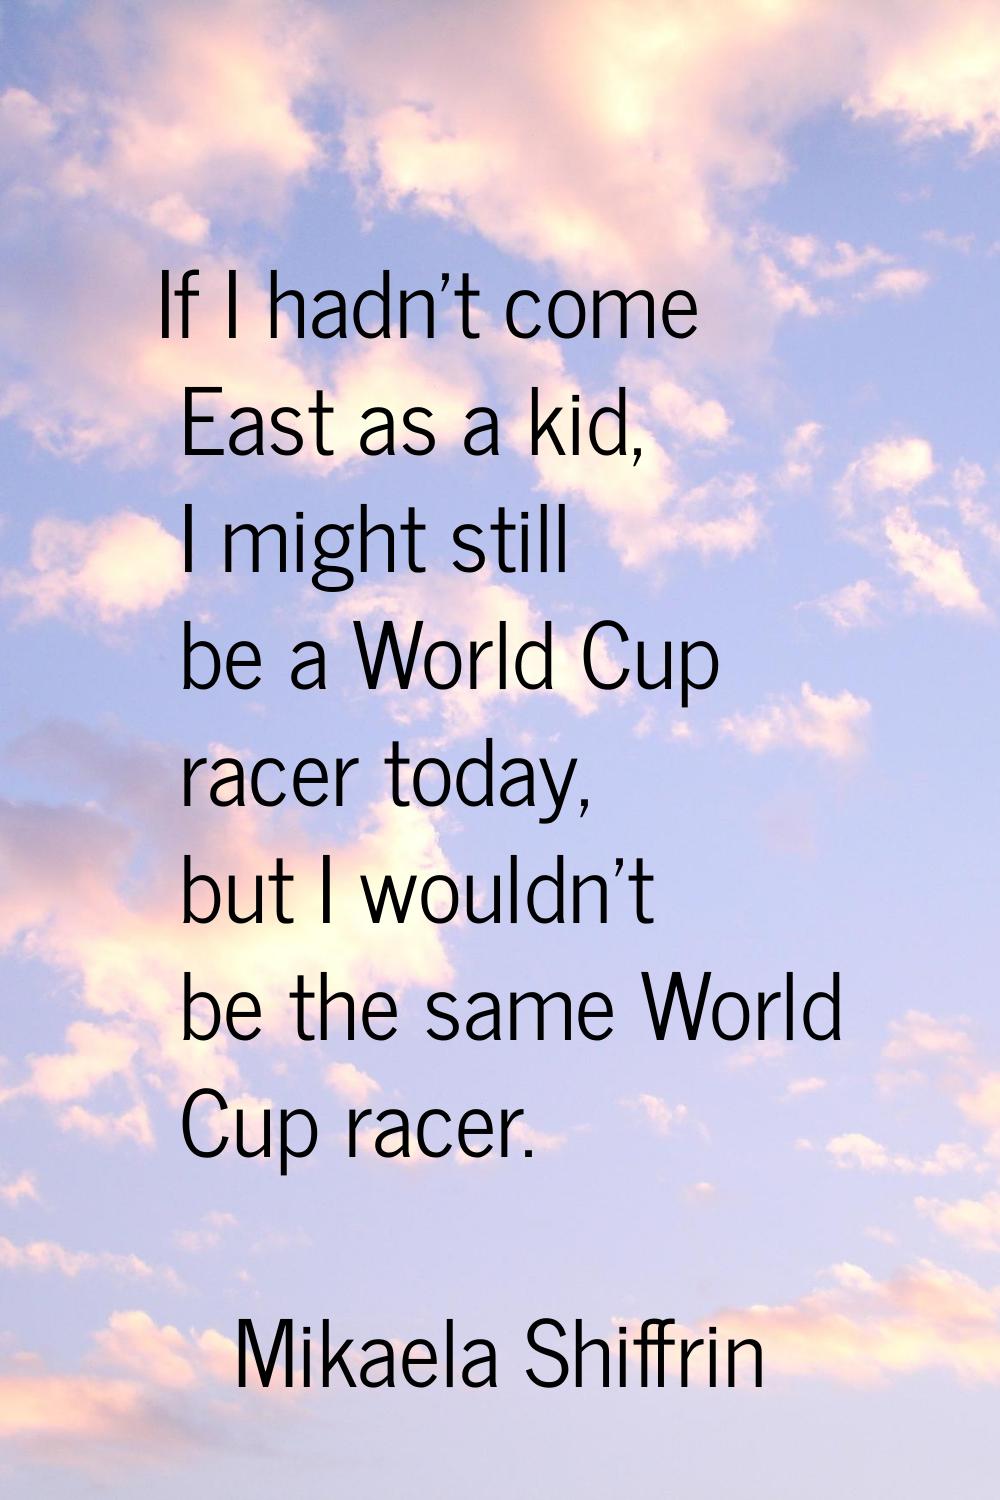 If I hadn't come East as a kid, I might still be a World Cup racer today, but I wouldn't be the sam